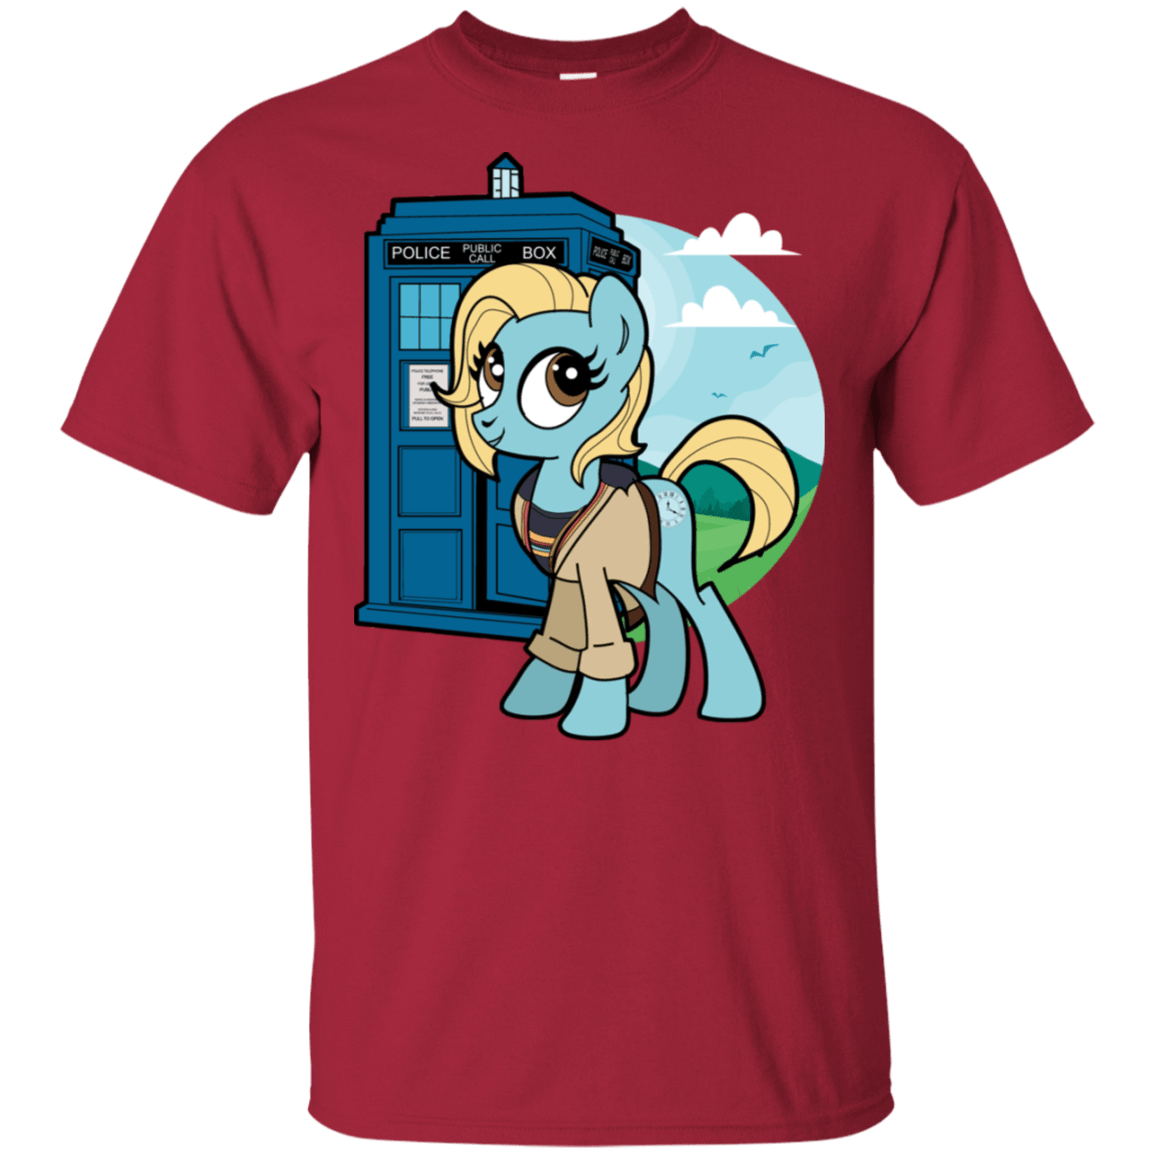 T-Shirts Cardinal / S Doctor Whooves 13 T-Shirt